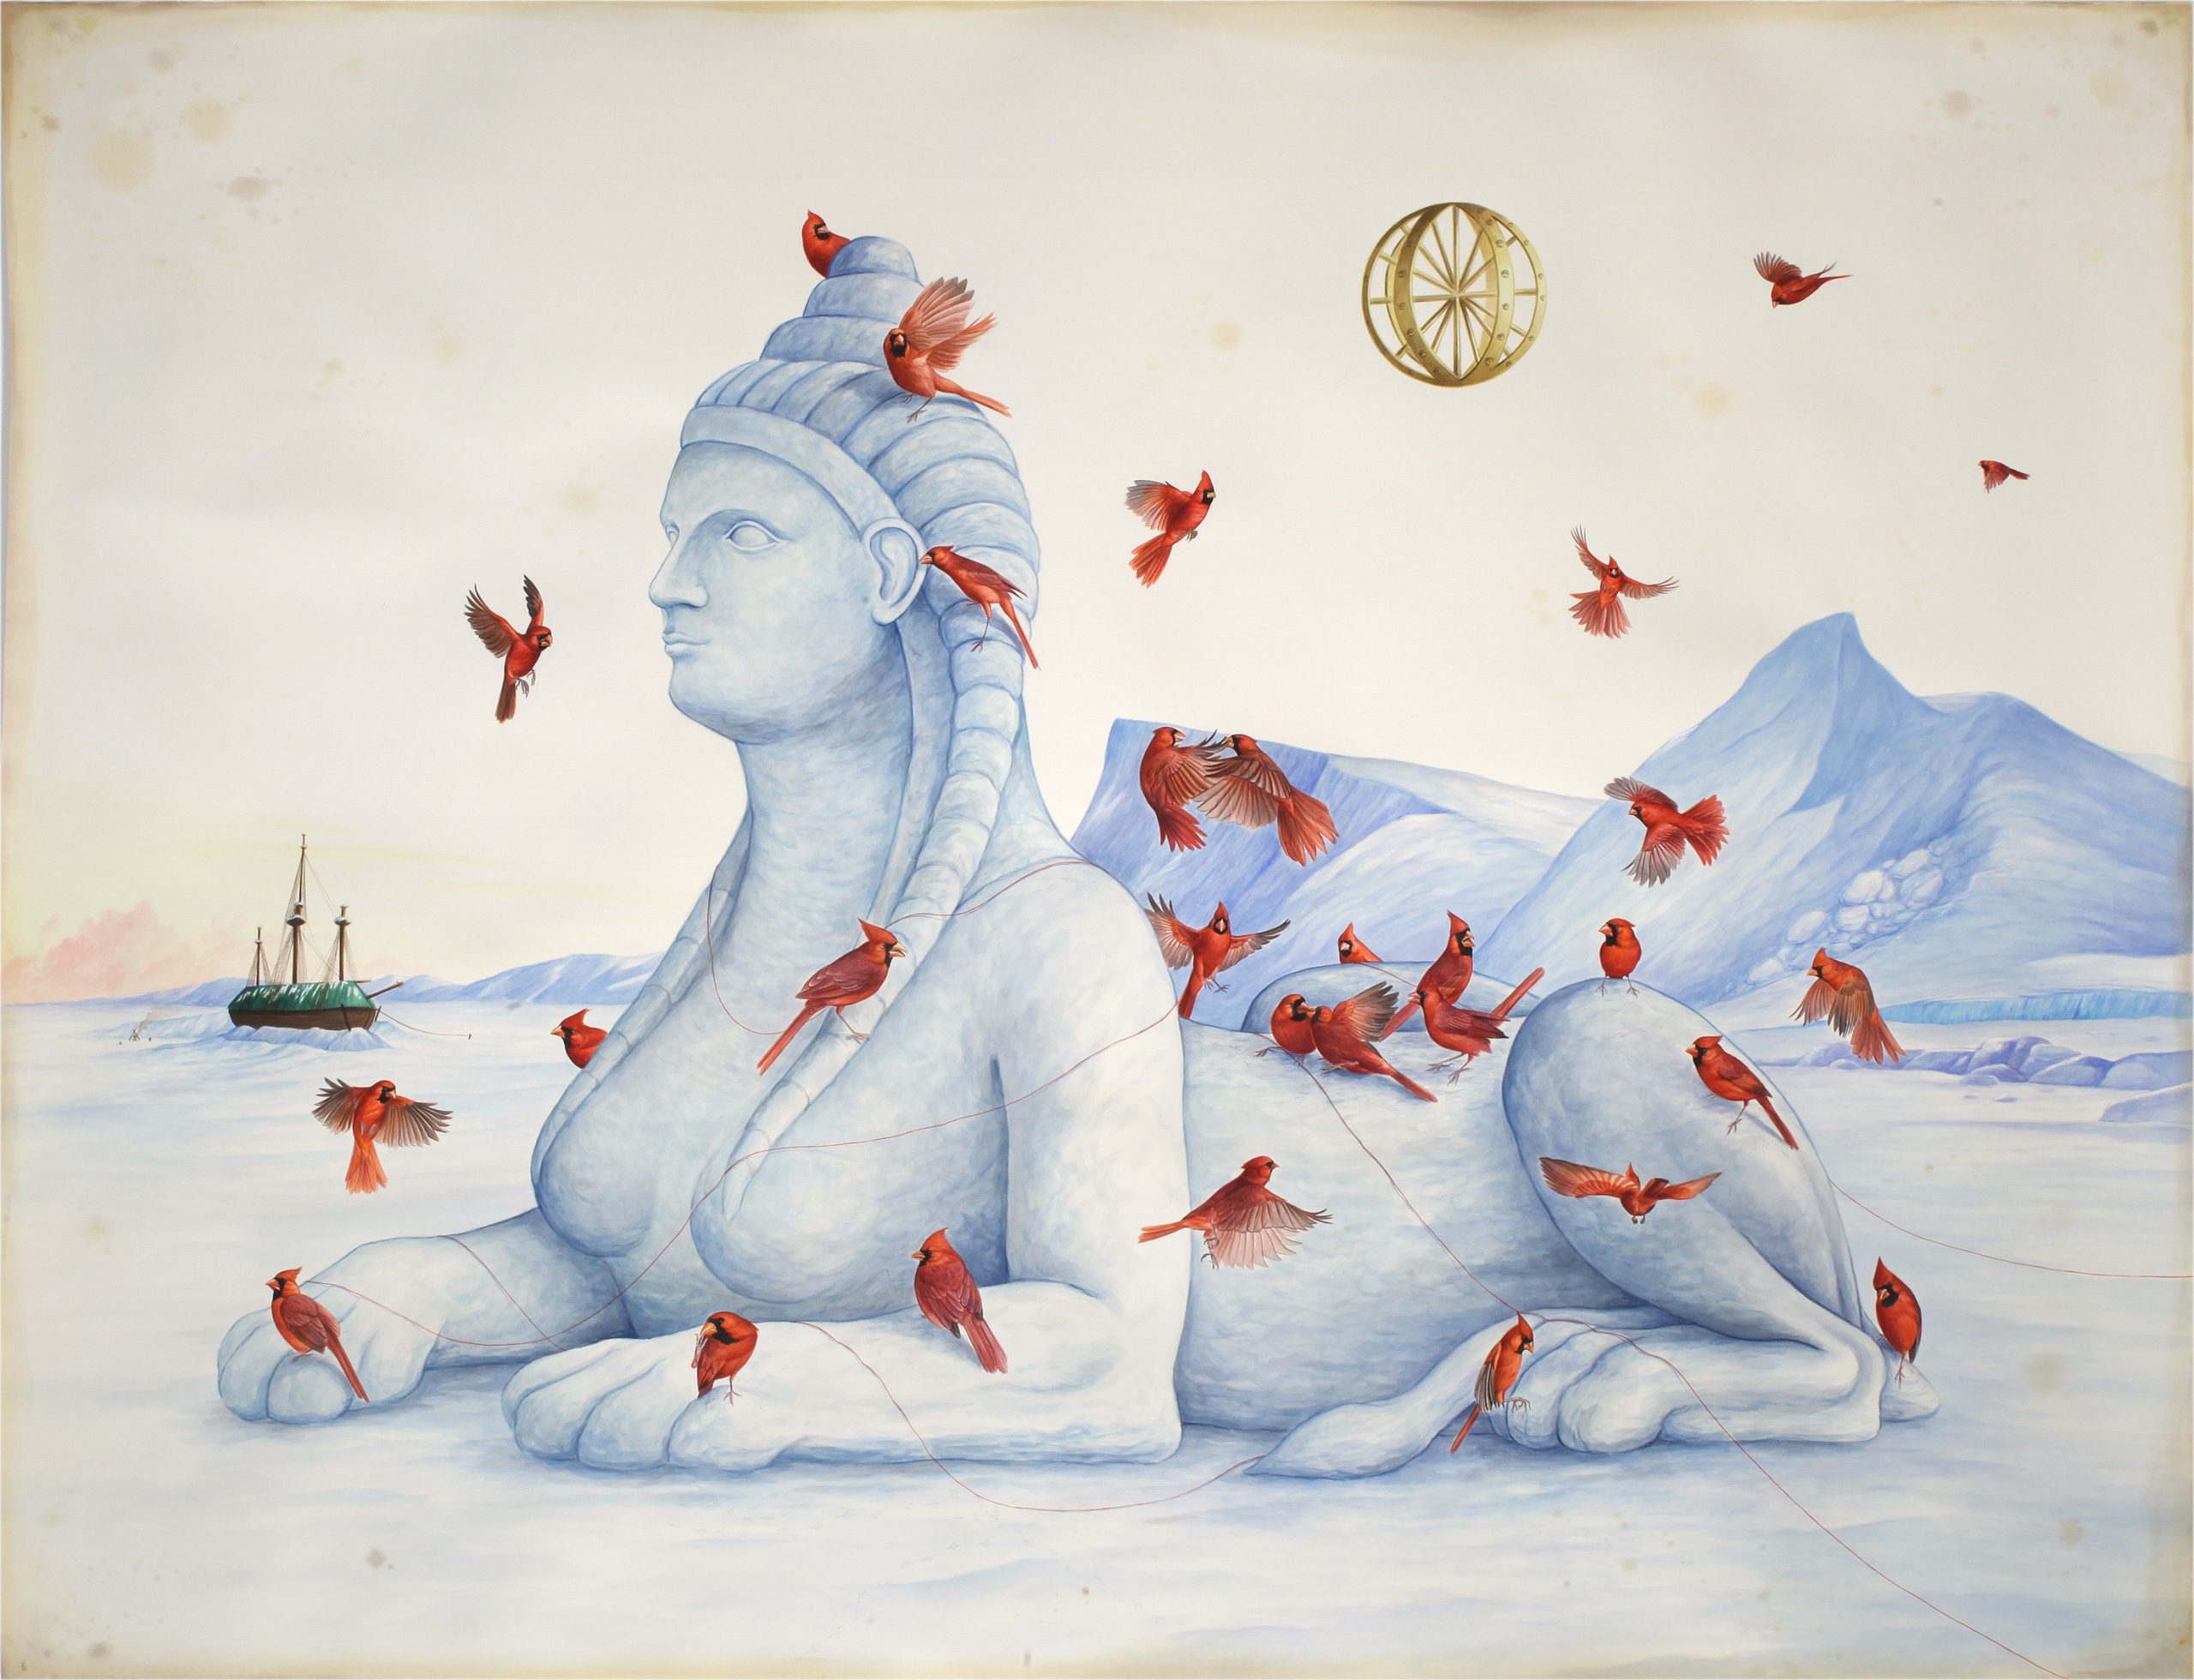 El Gato Chimney, Riddles in the snow, 2018, watercolors and mixed media on paper, 200×153 cm